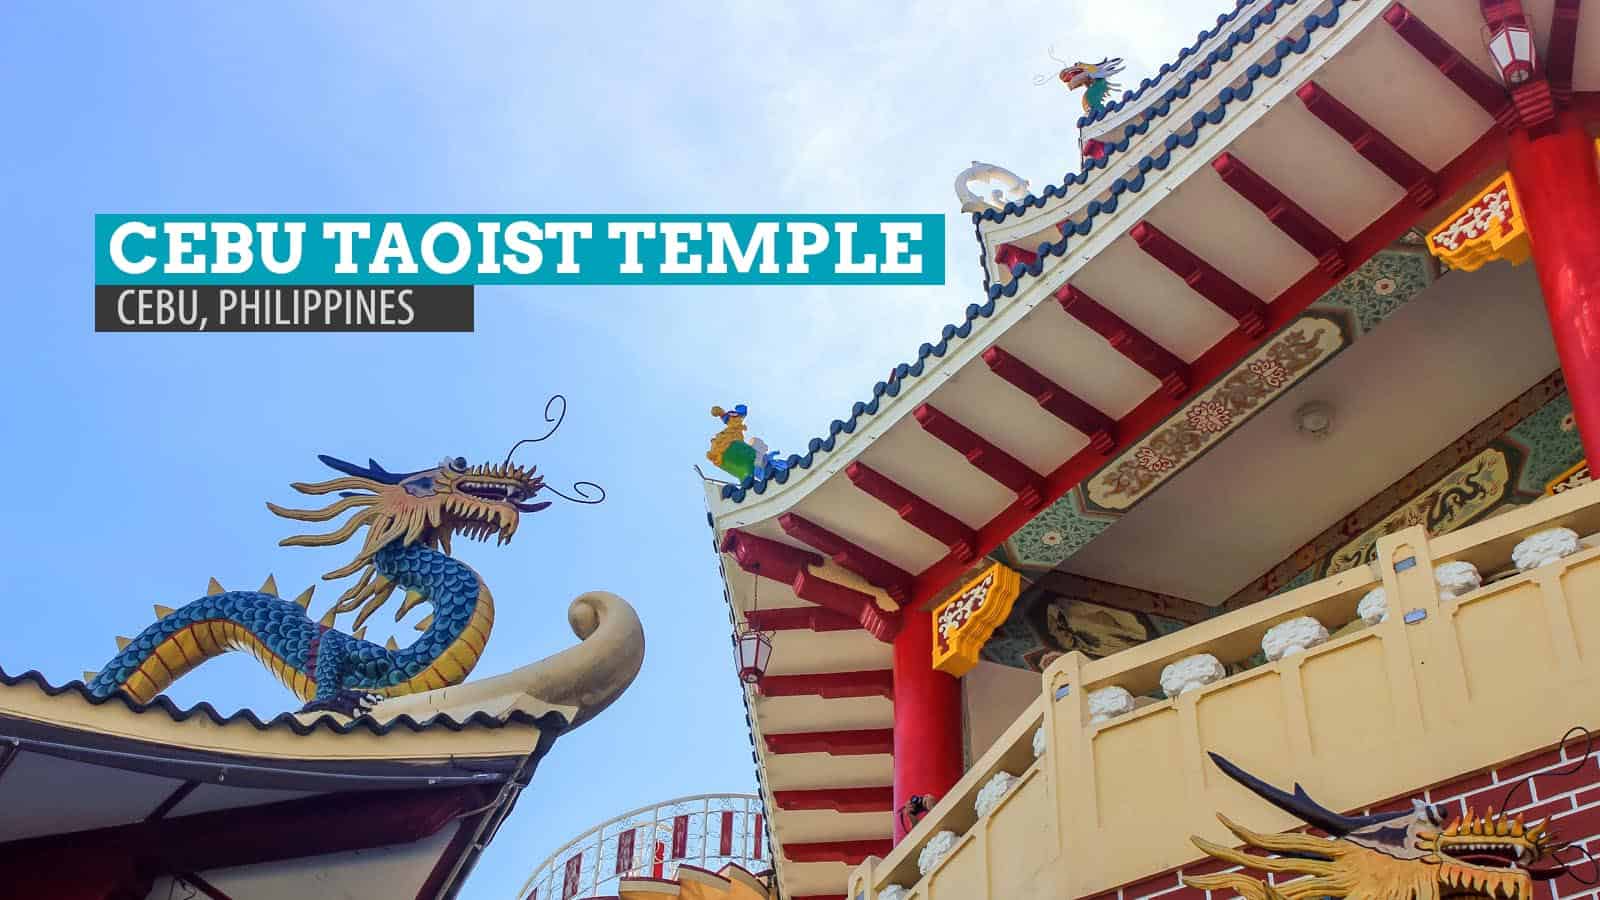 Cebu Taoist Temple, Philippines: A Date with Dragons